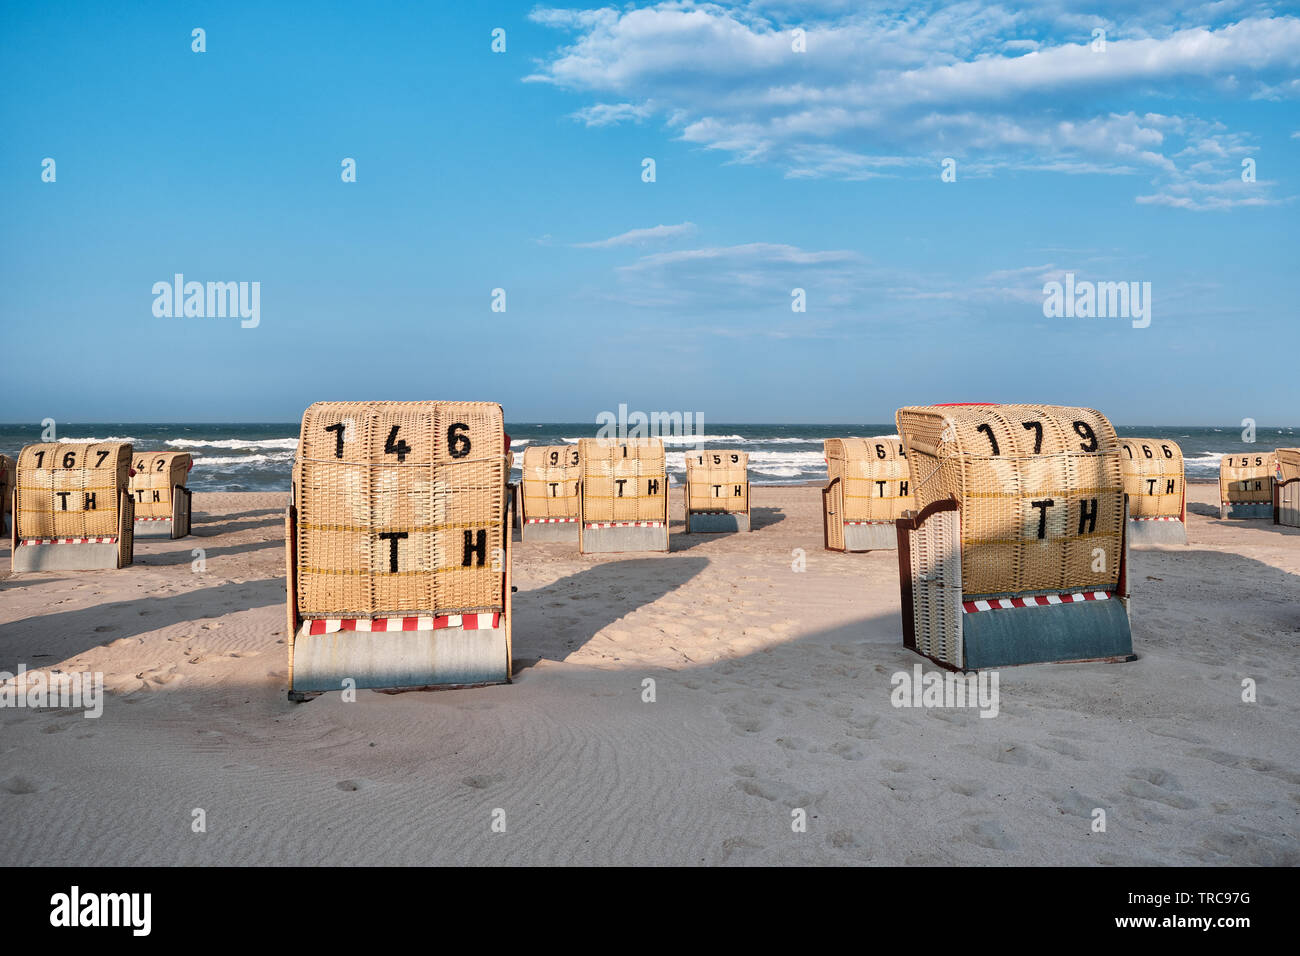 View from a beach onto the Baltic Sea and the backsides of empty beach chairs at sunset Stock Photo